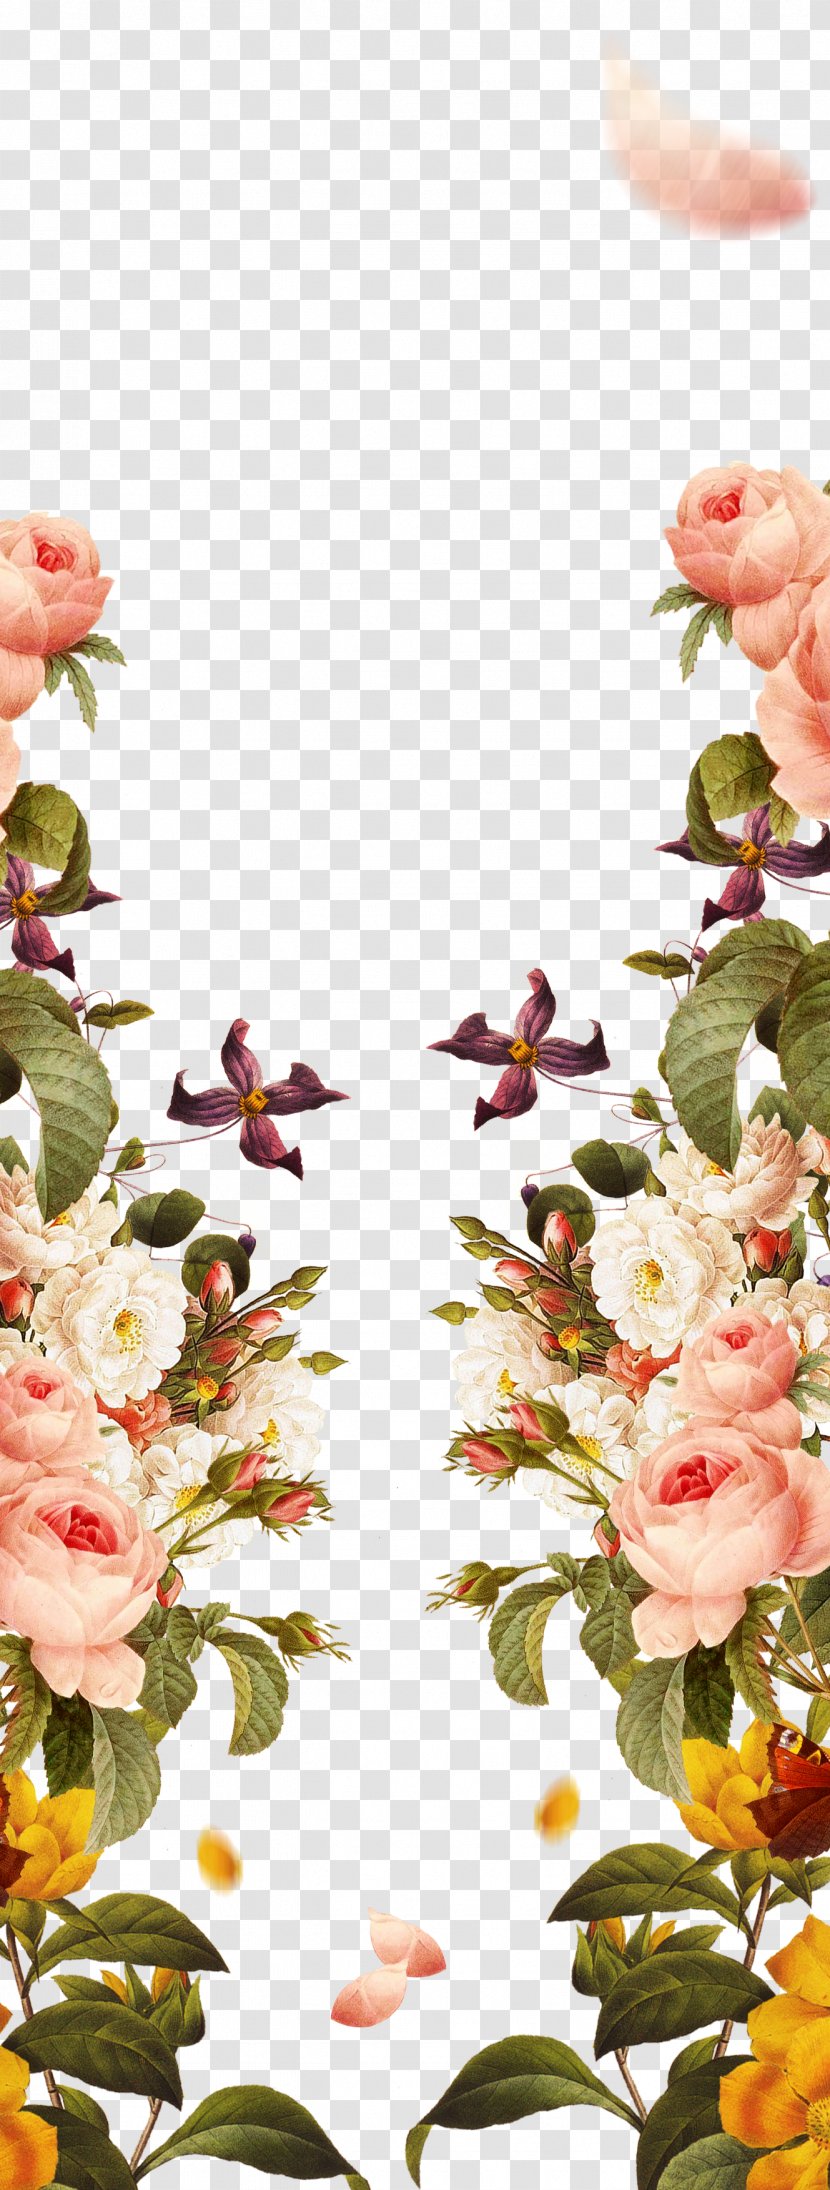 Pink Flowers Garden Roses - Flower Arranging - Hand Painted Borders Transparent PNG